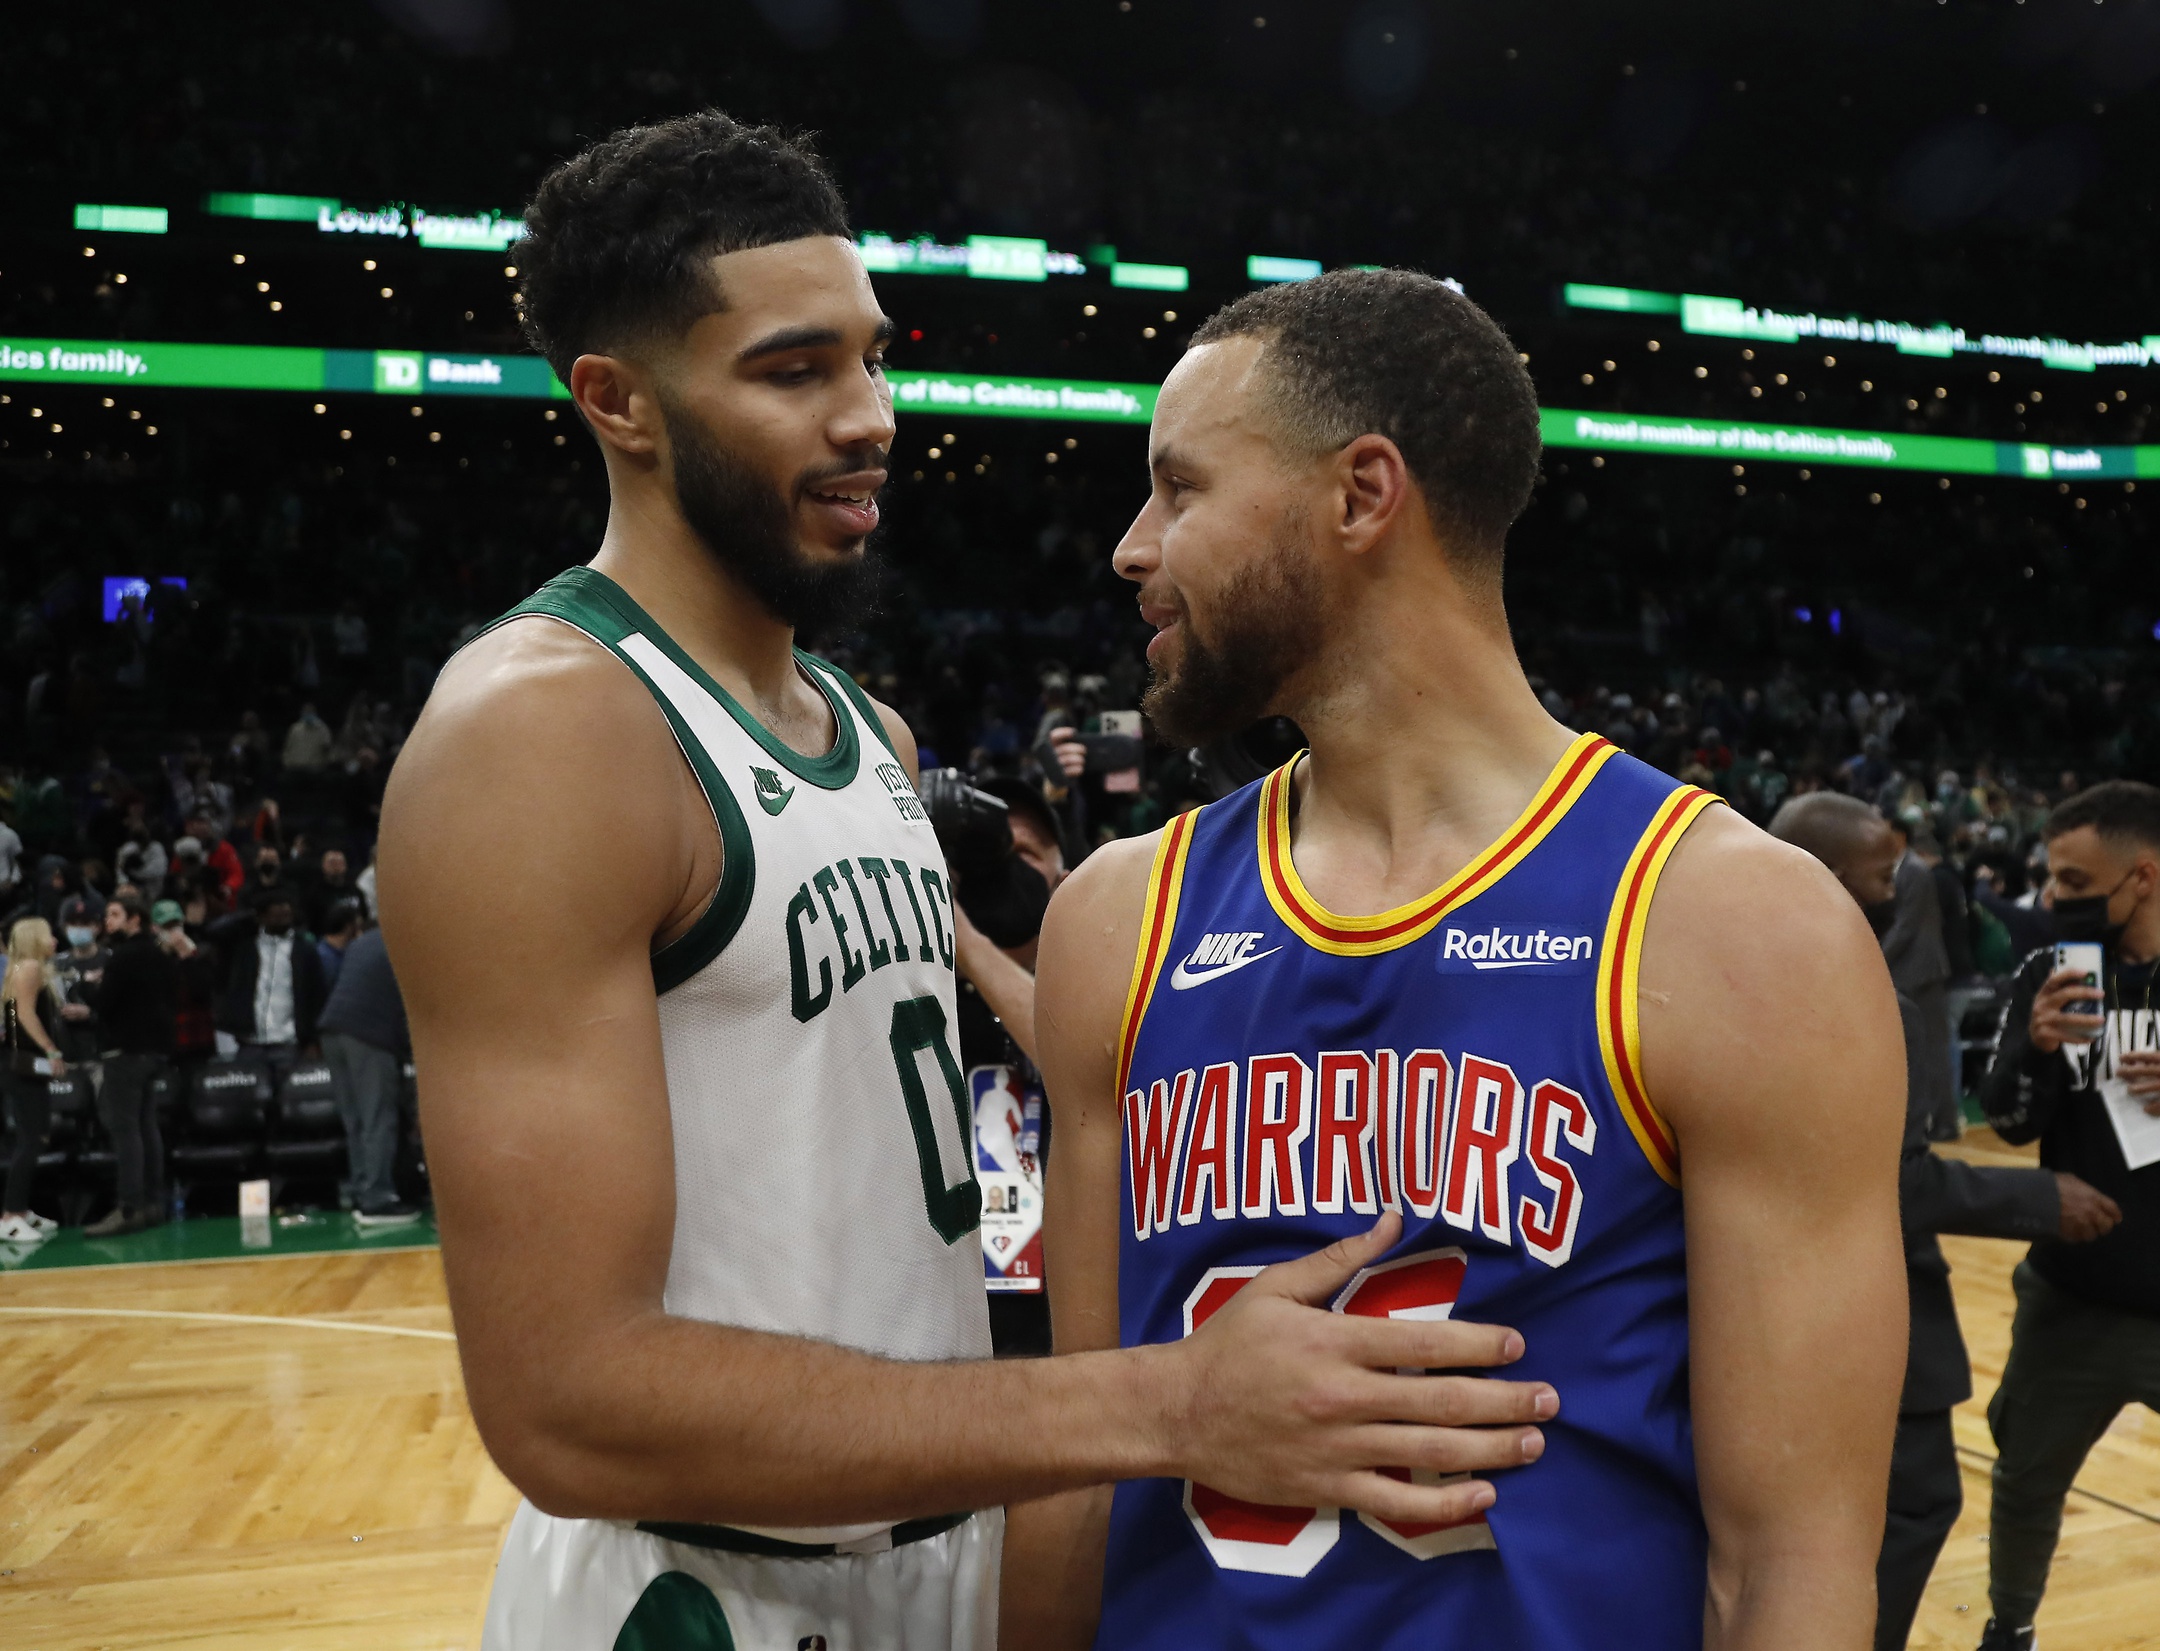 Boston Celtics forward Jayson Tatum (0) talks with Golden State Warriors guard Stephen Curry (30) after their game at TD Garden.